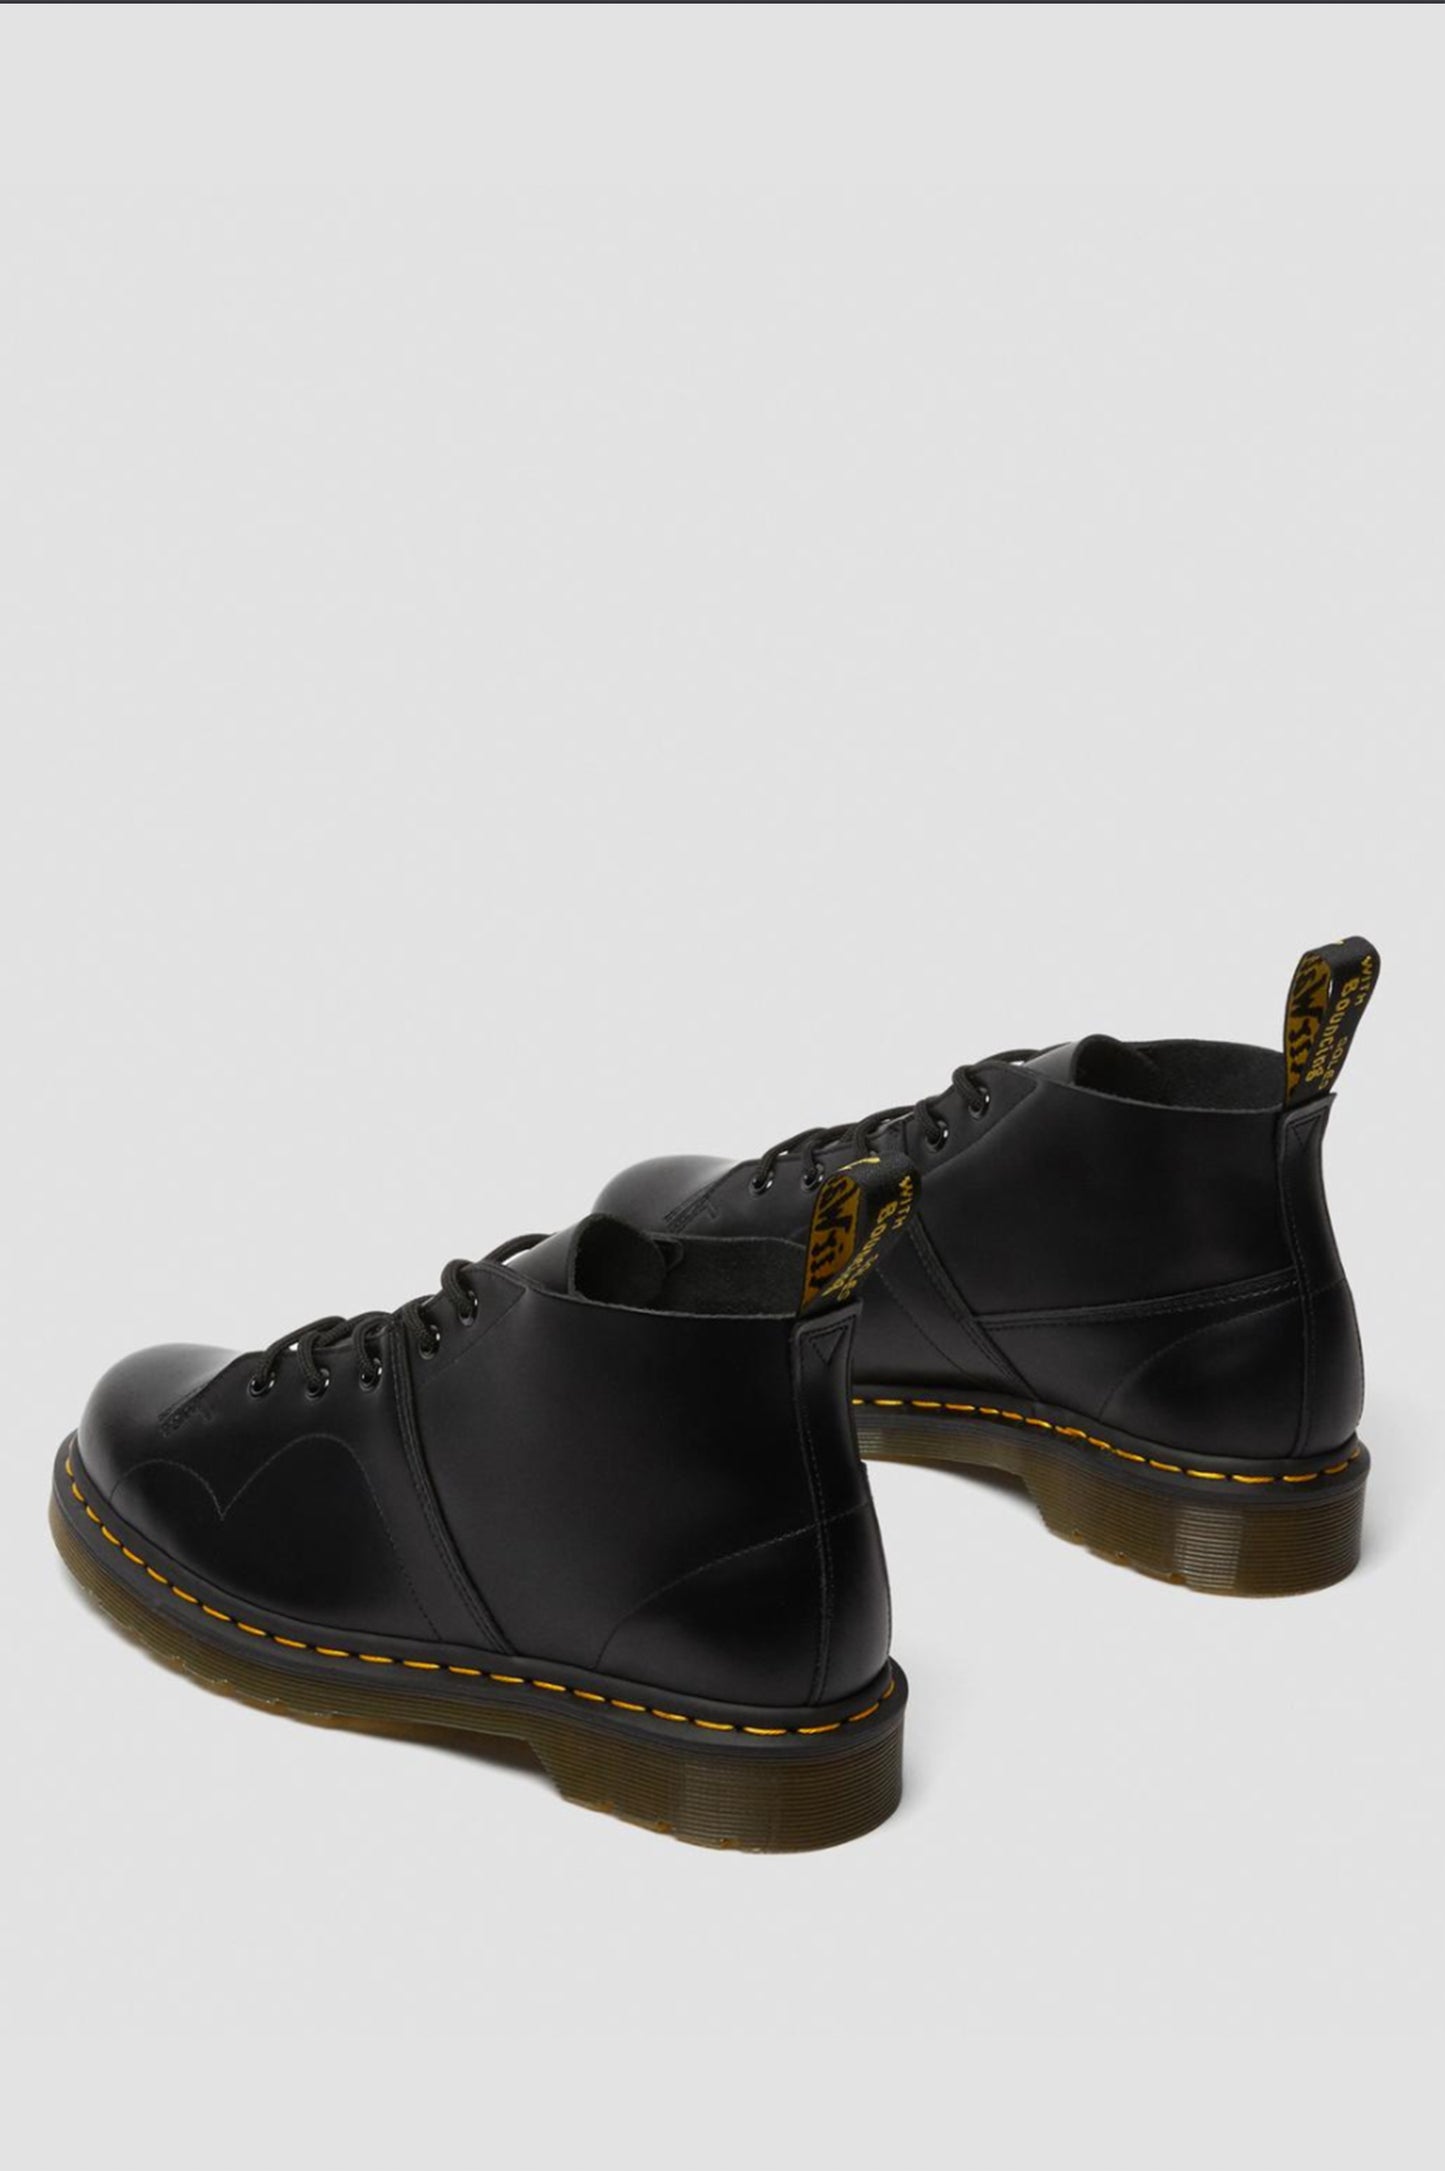 BLACK CHURCH SMOOTH LEATHER MONKEY BOOTS